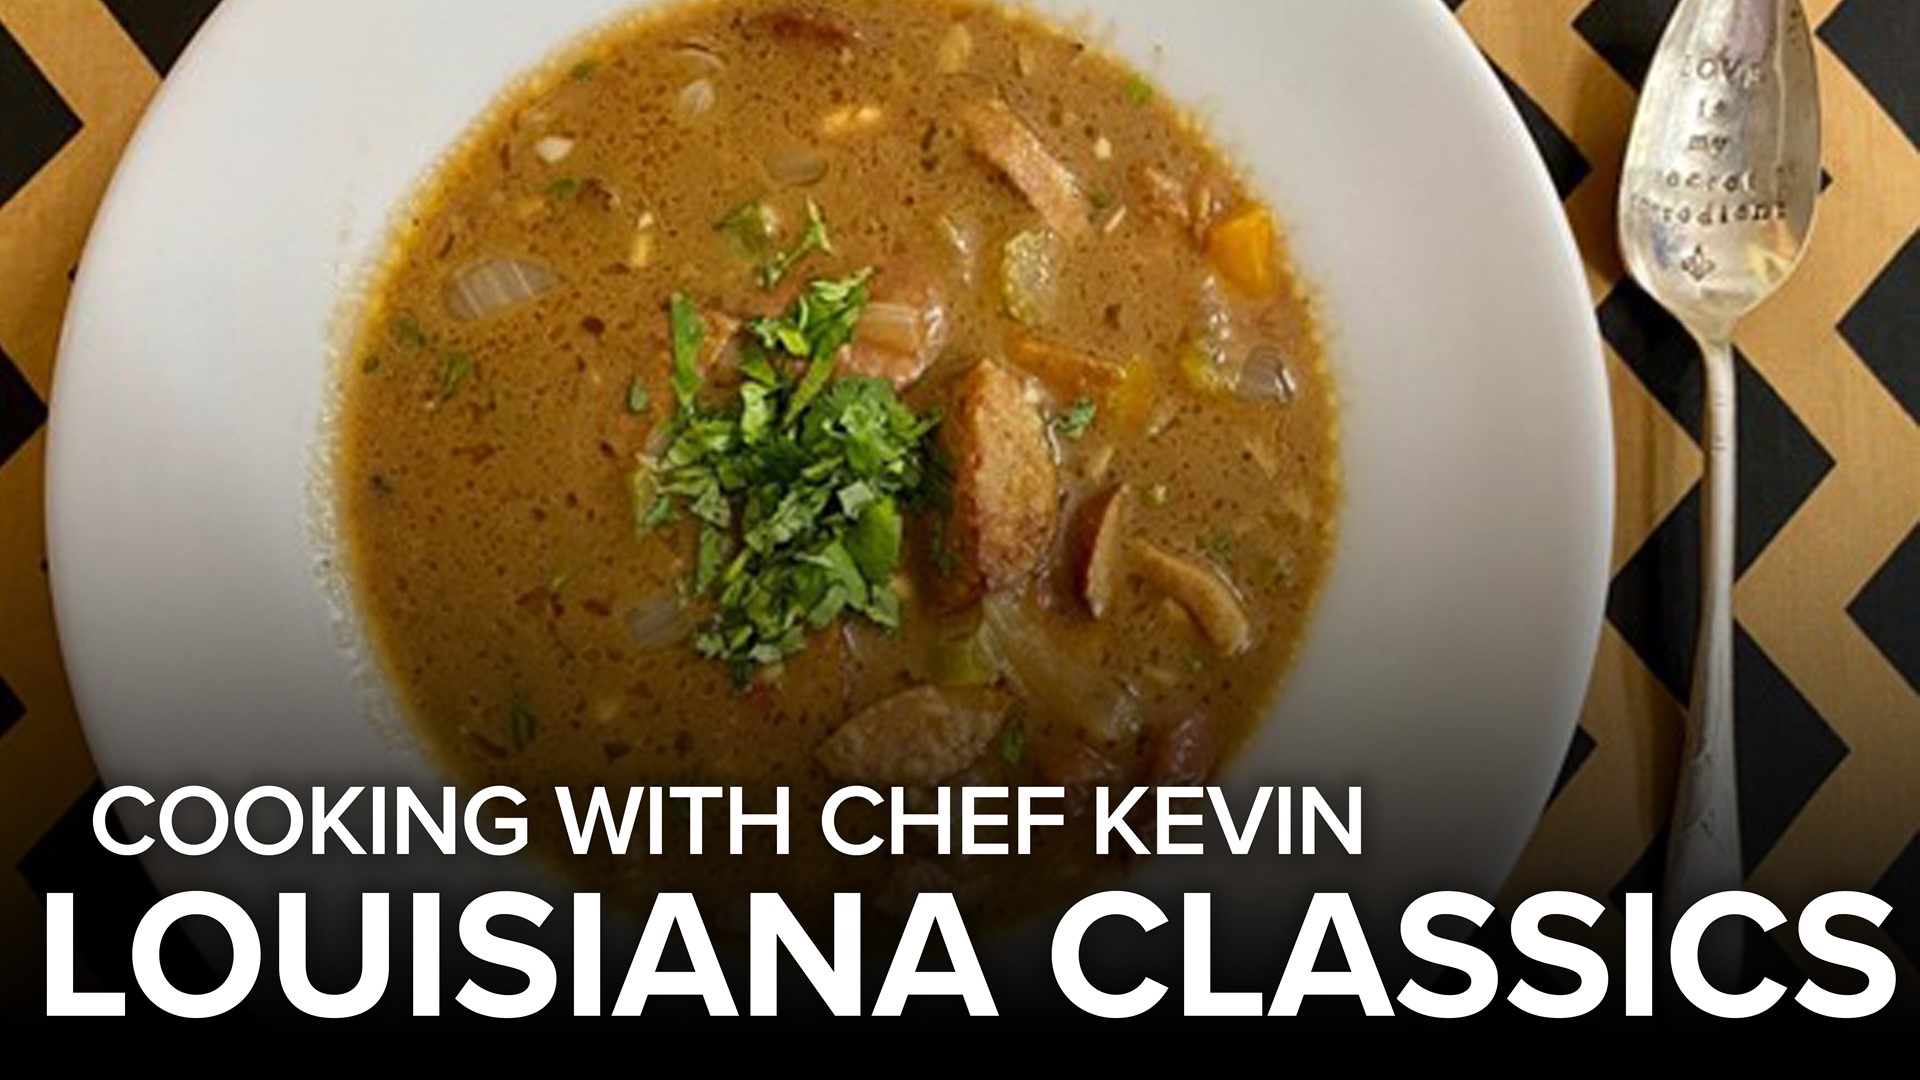 Learn to make gumbo, jambalaya and beignets with Chef Kevin Belton!